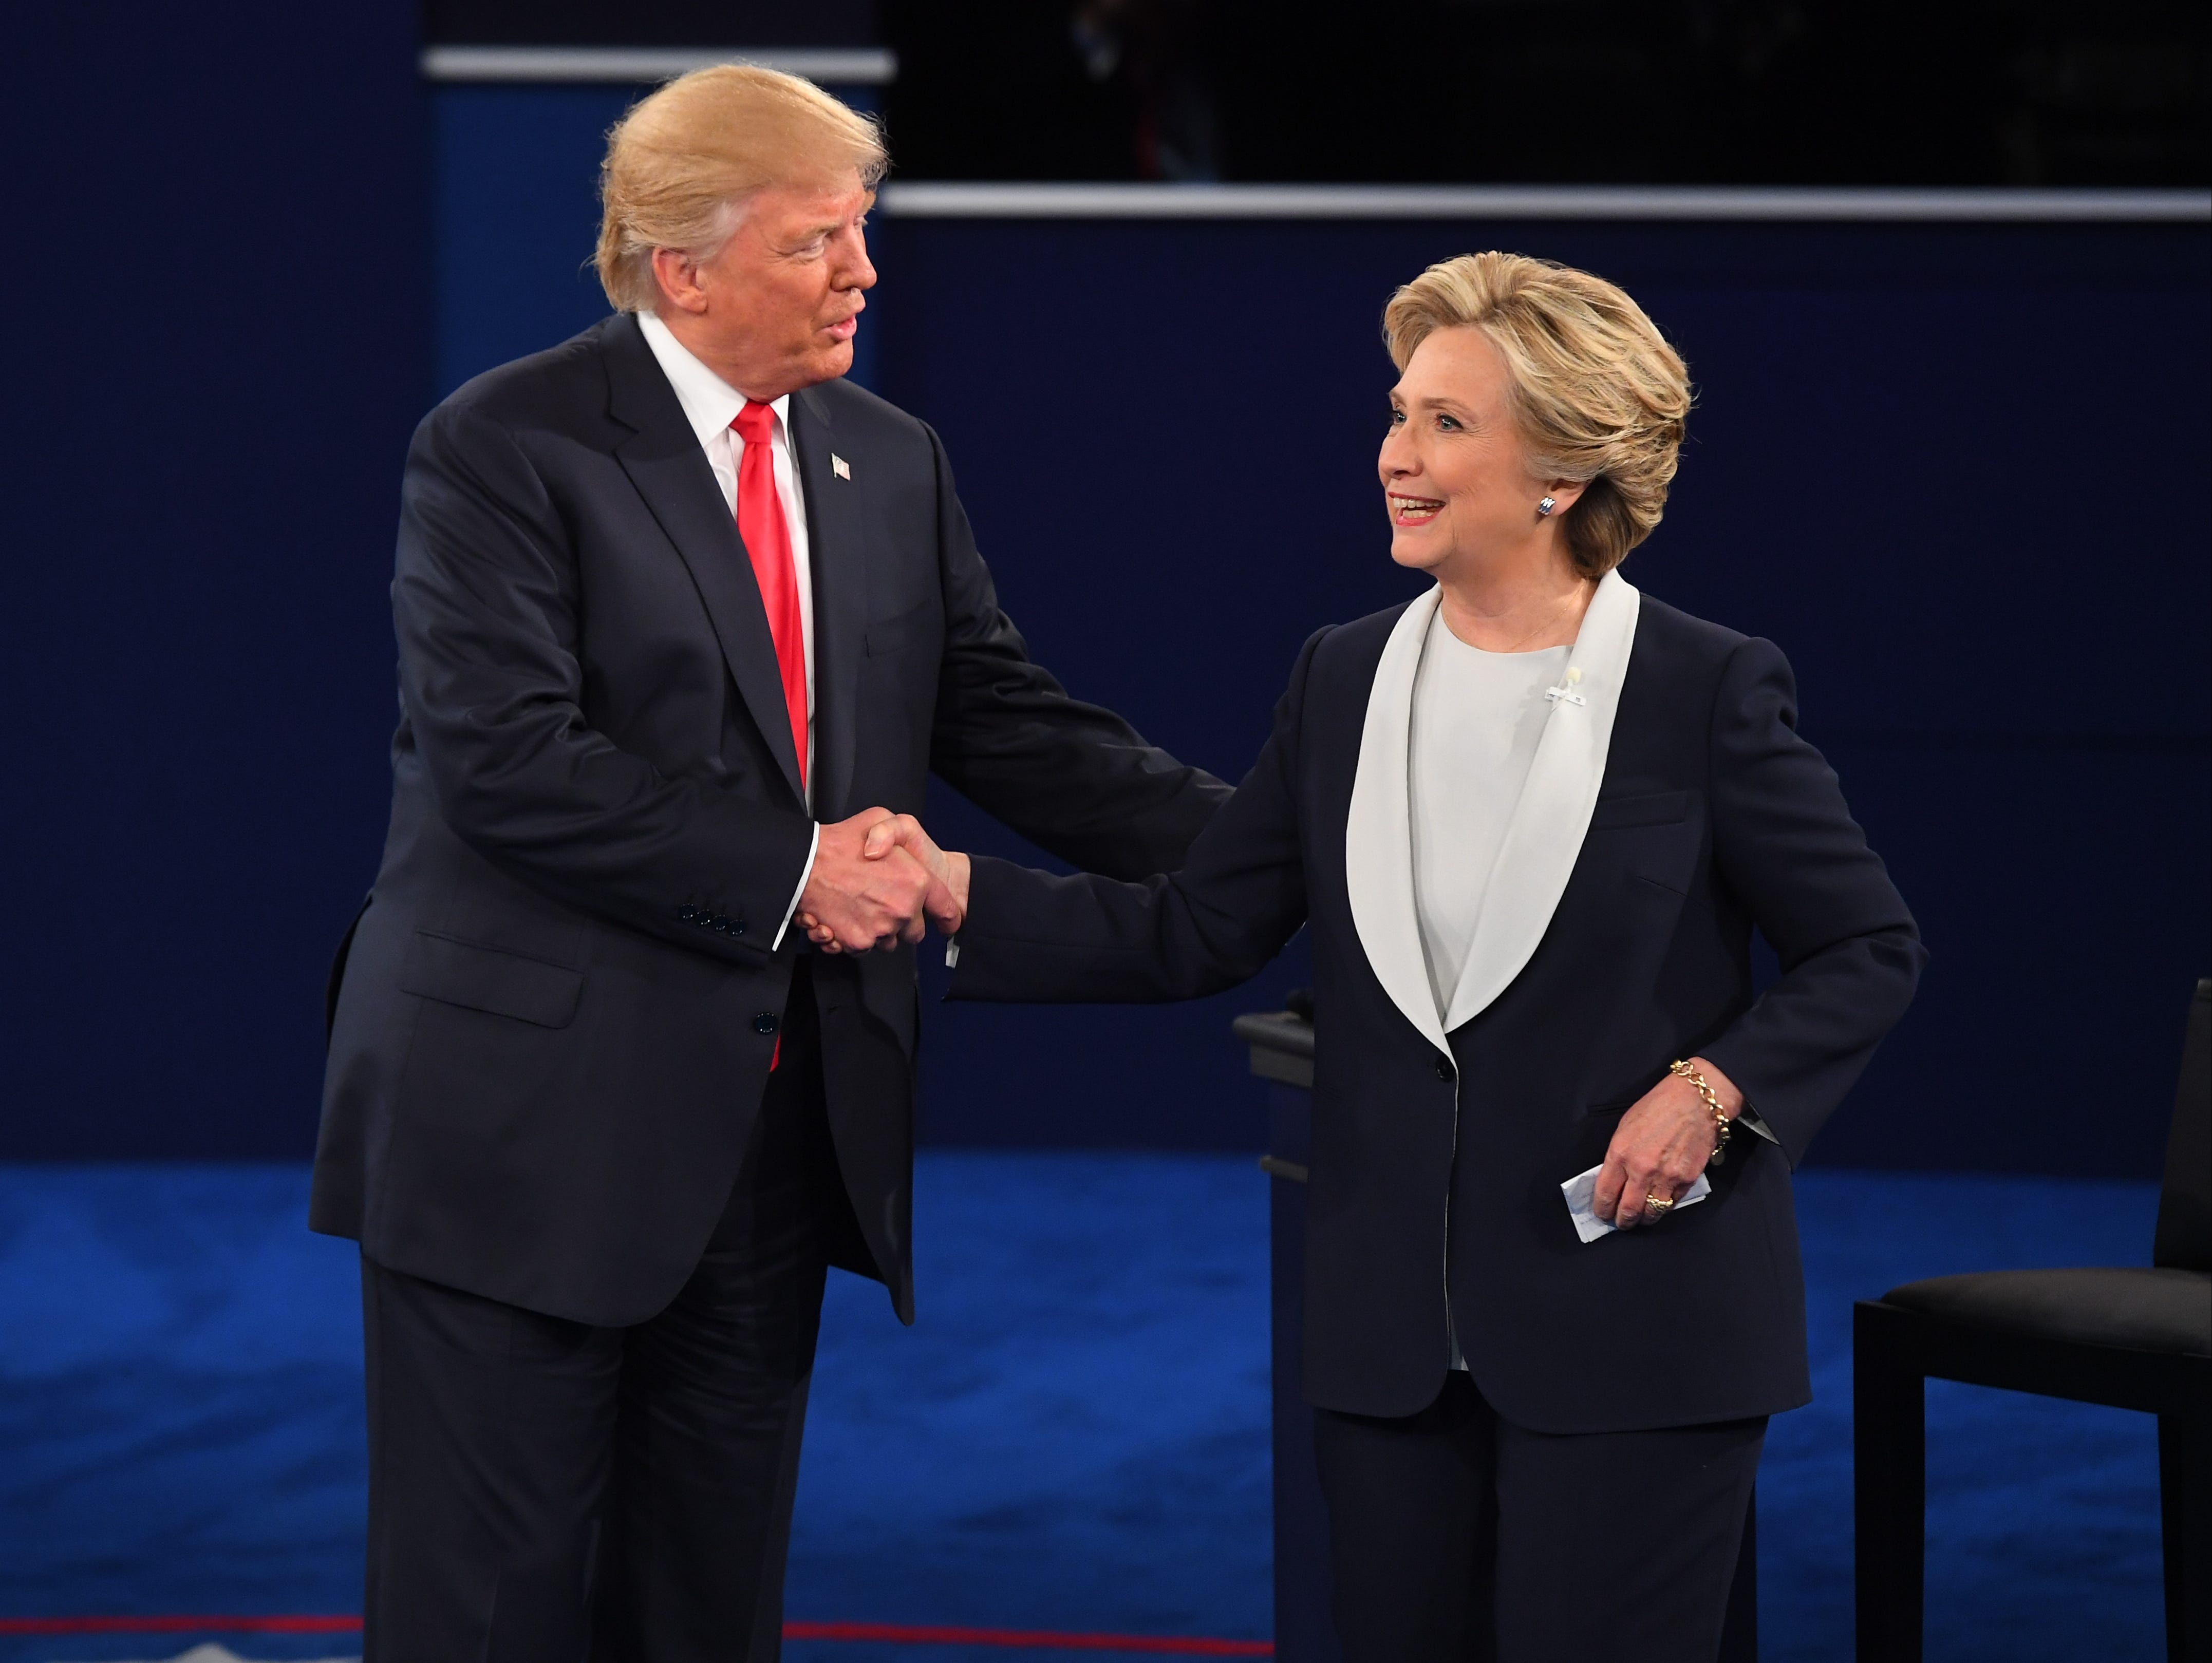 Hillary Clinton and Donald Trump shake hands after the second presidential debate at Washington University in St Louis.